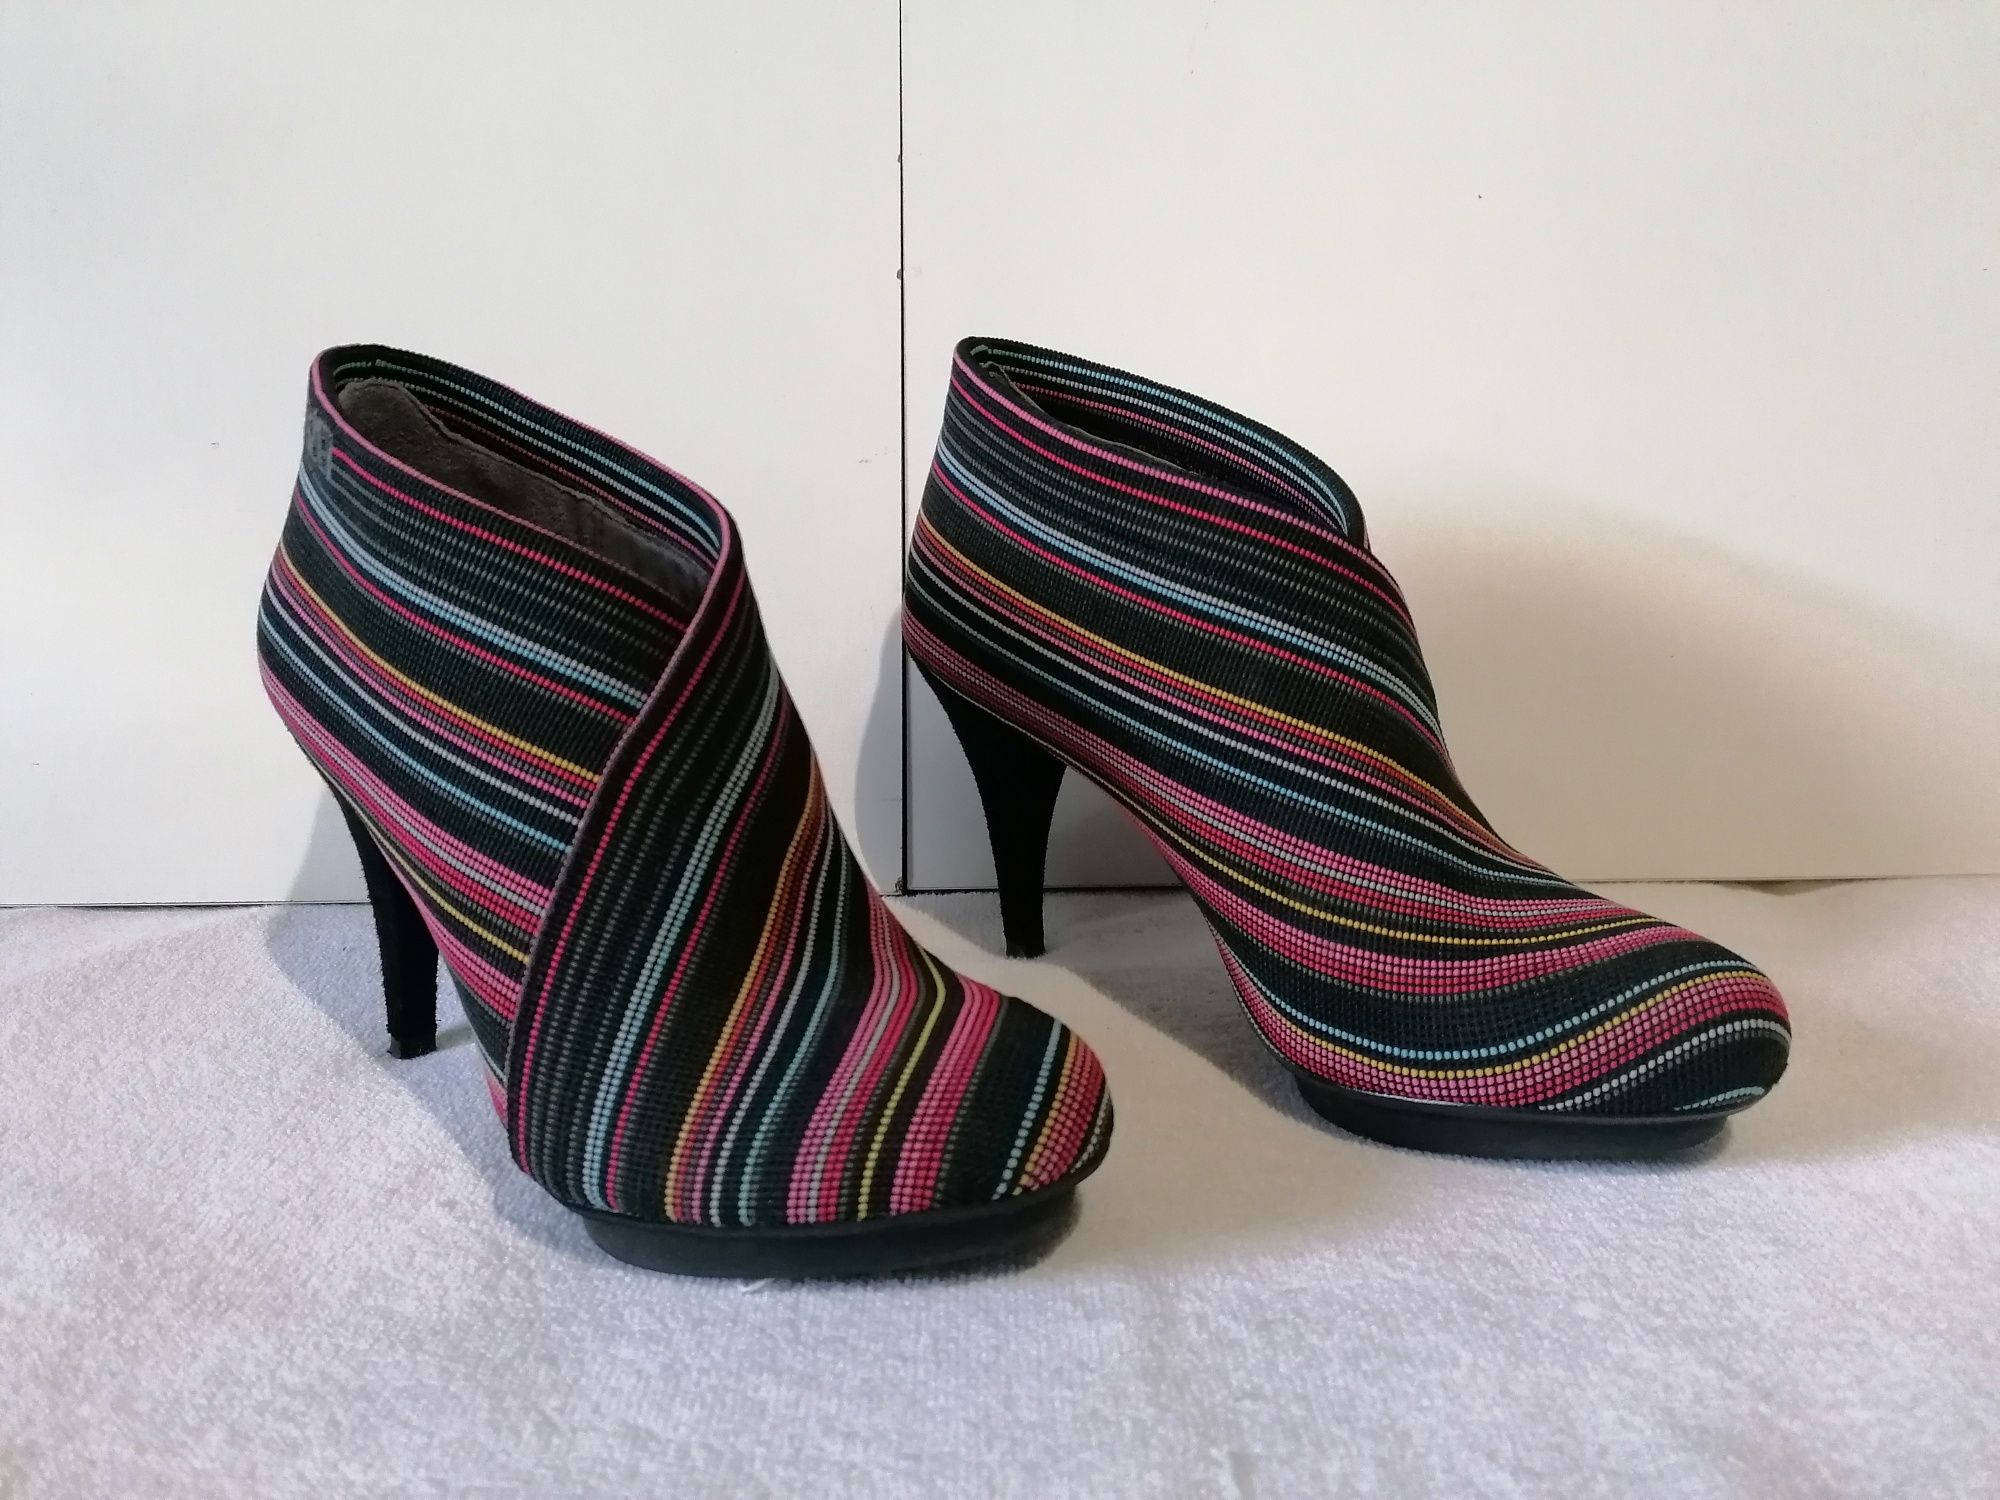 United Nude Shoes